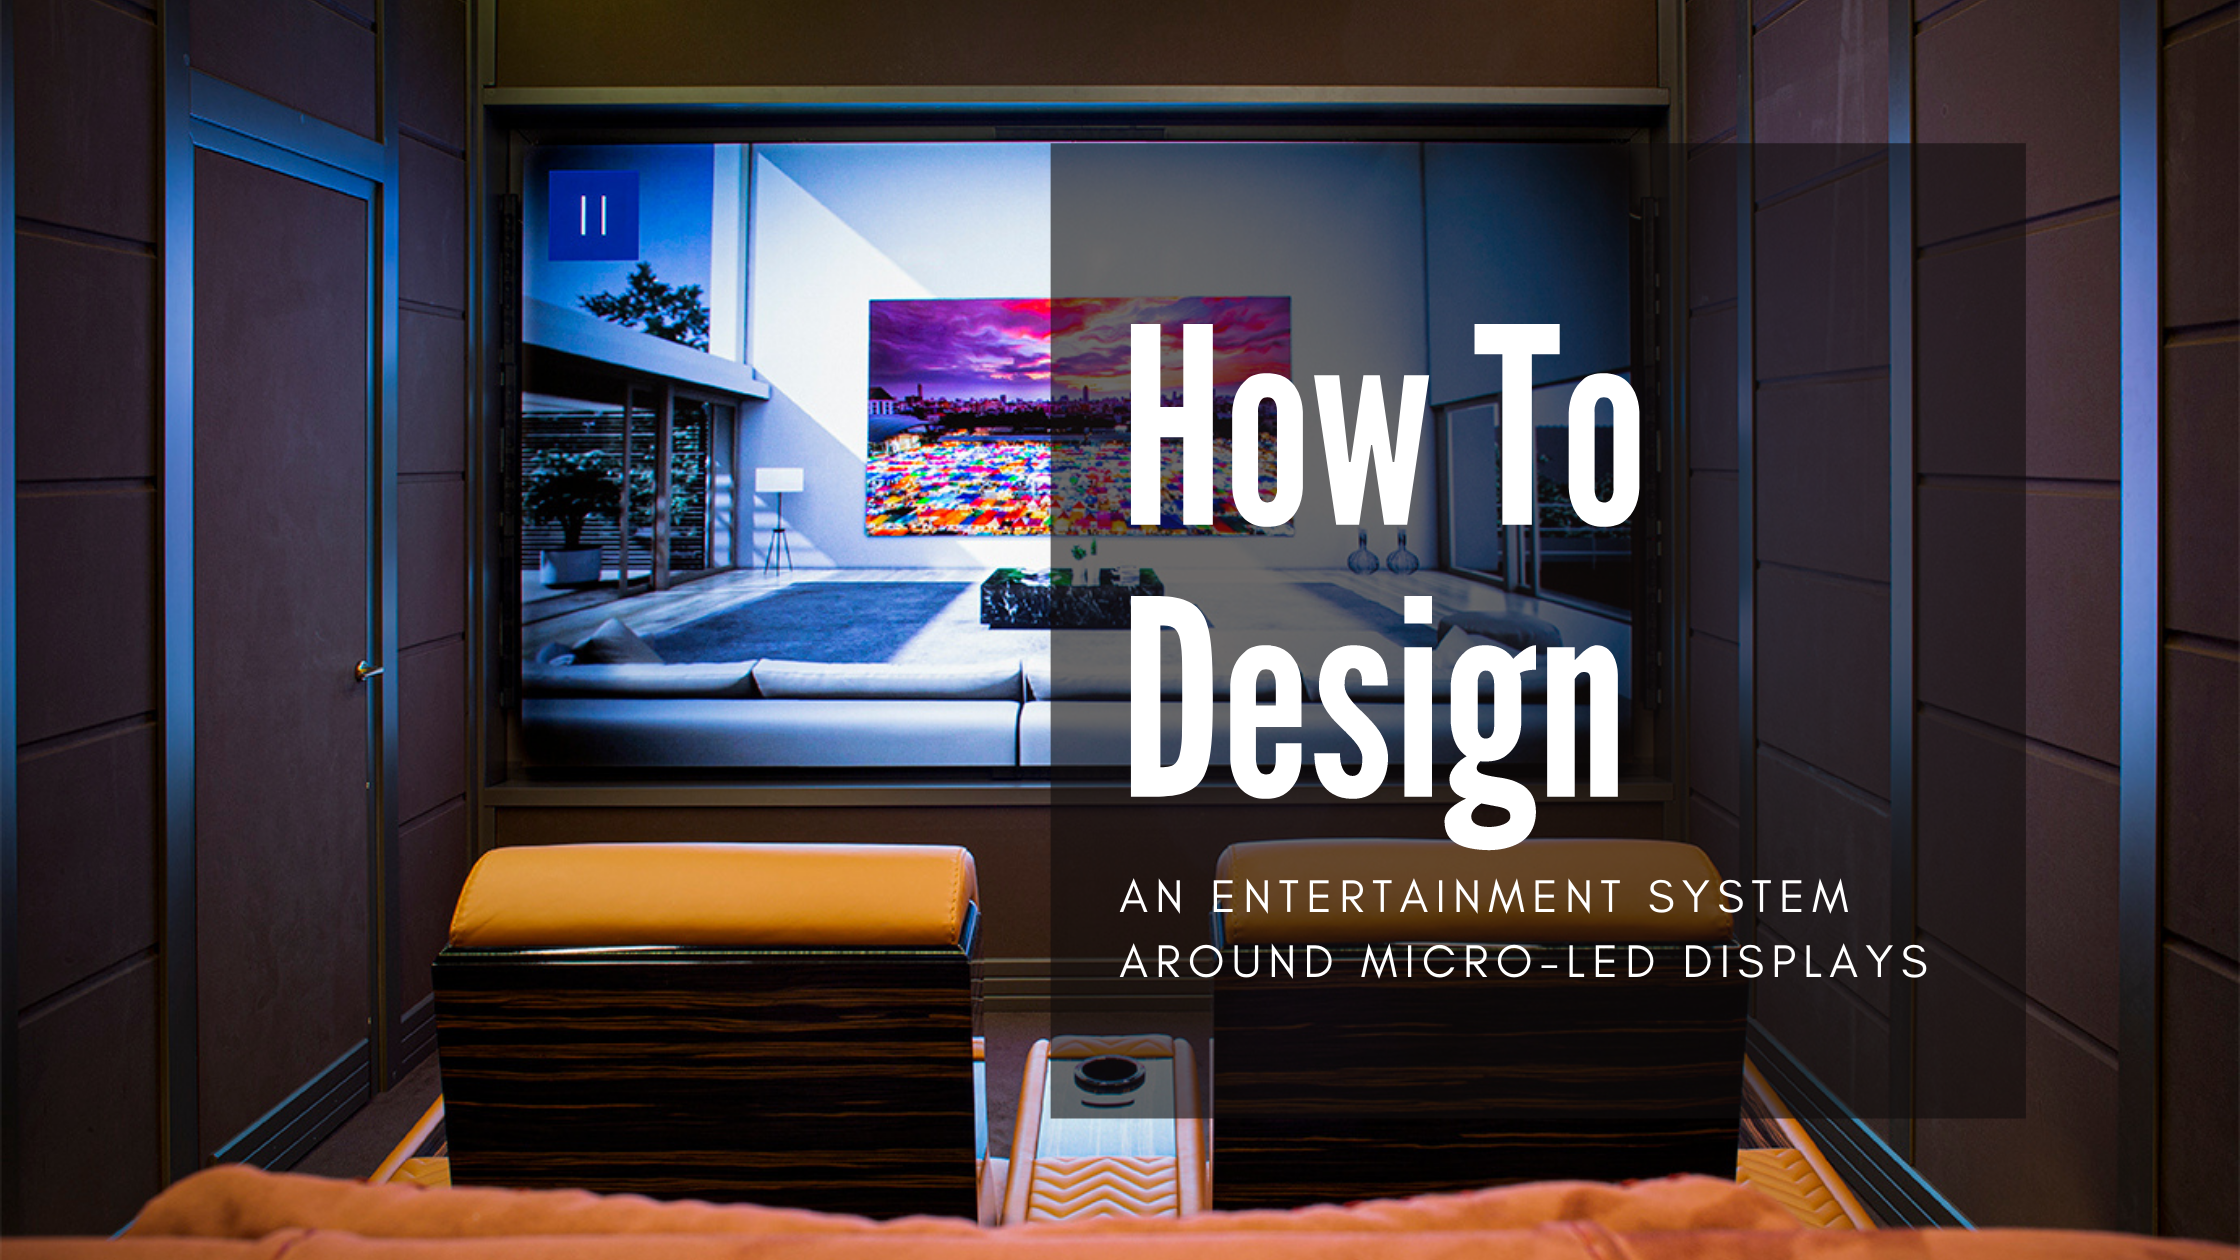 Designing an Entertainment System around MicroLED Displays